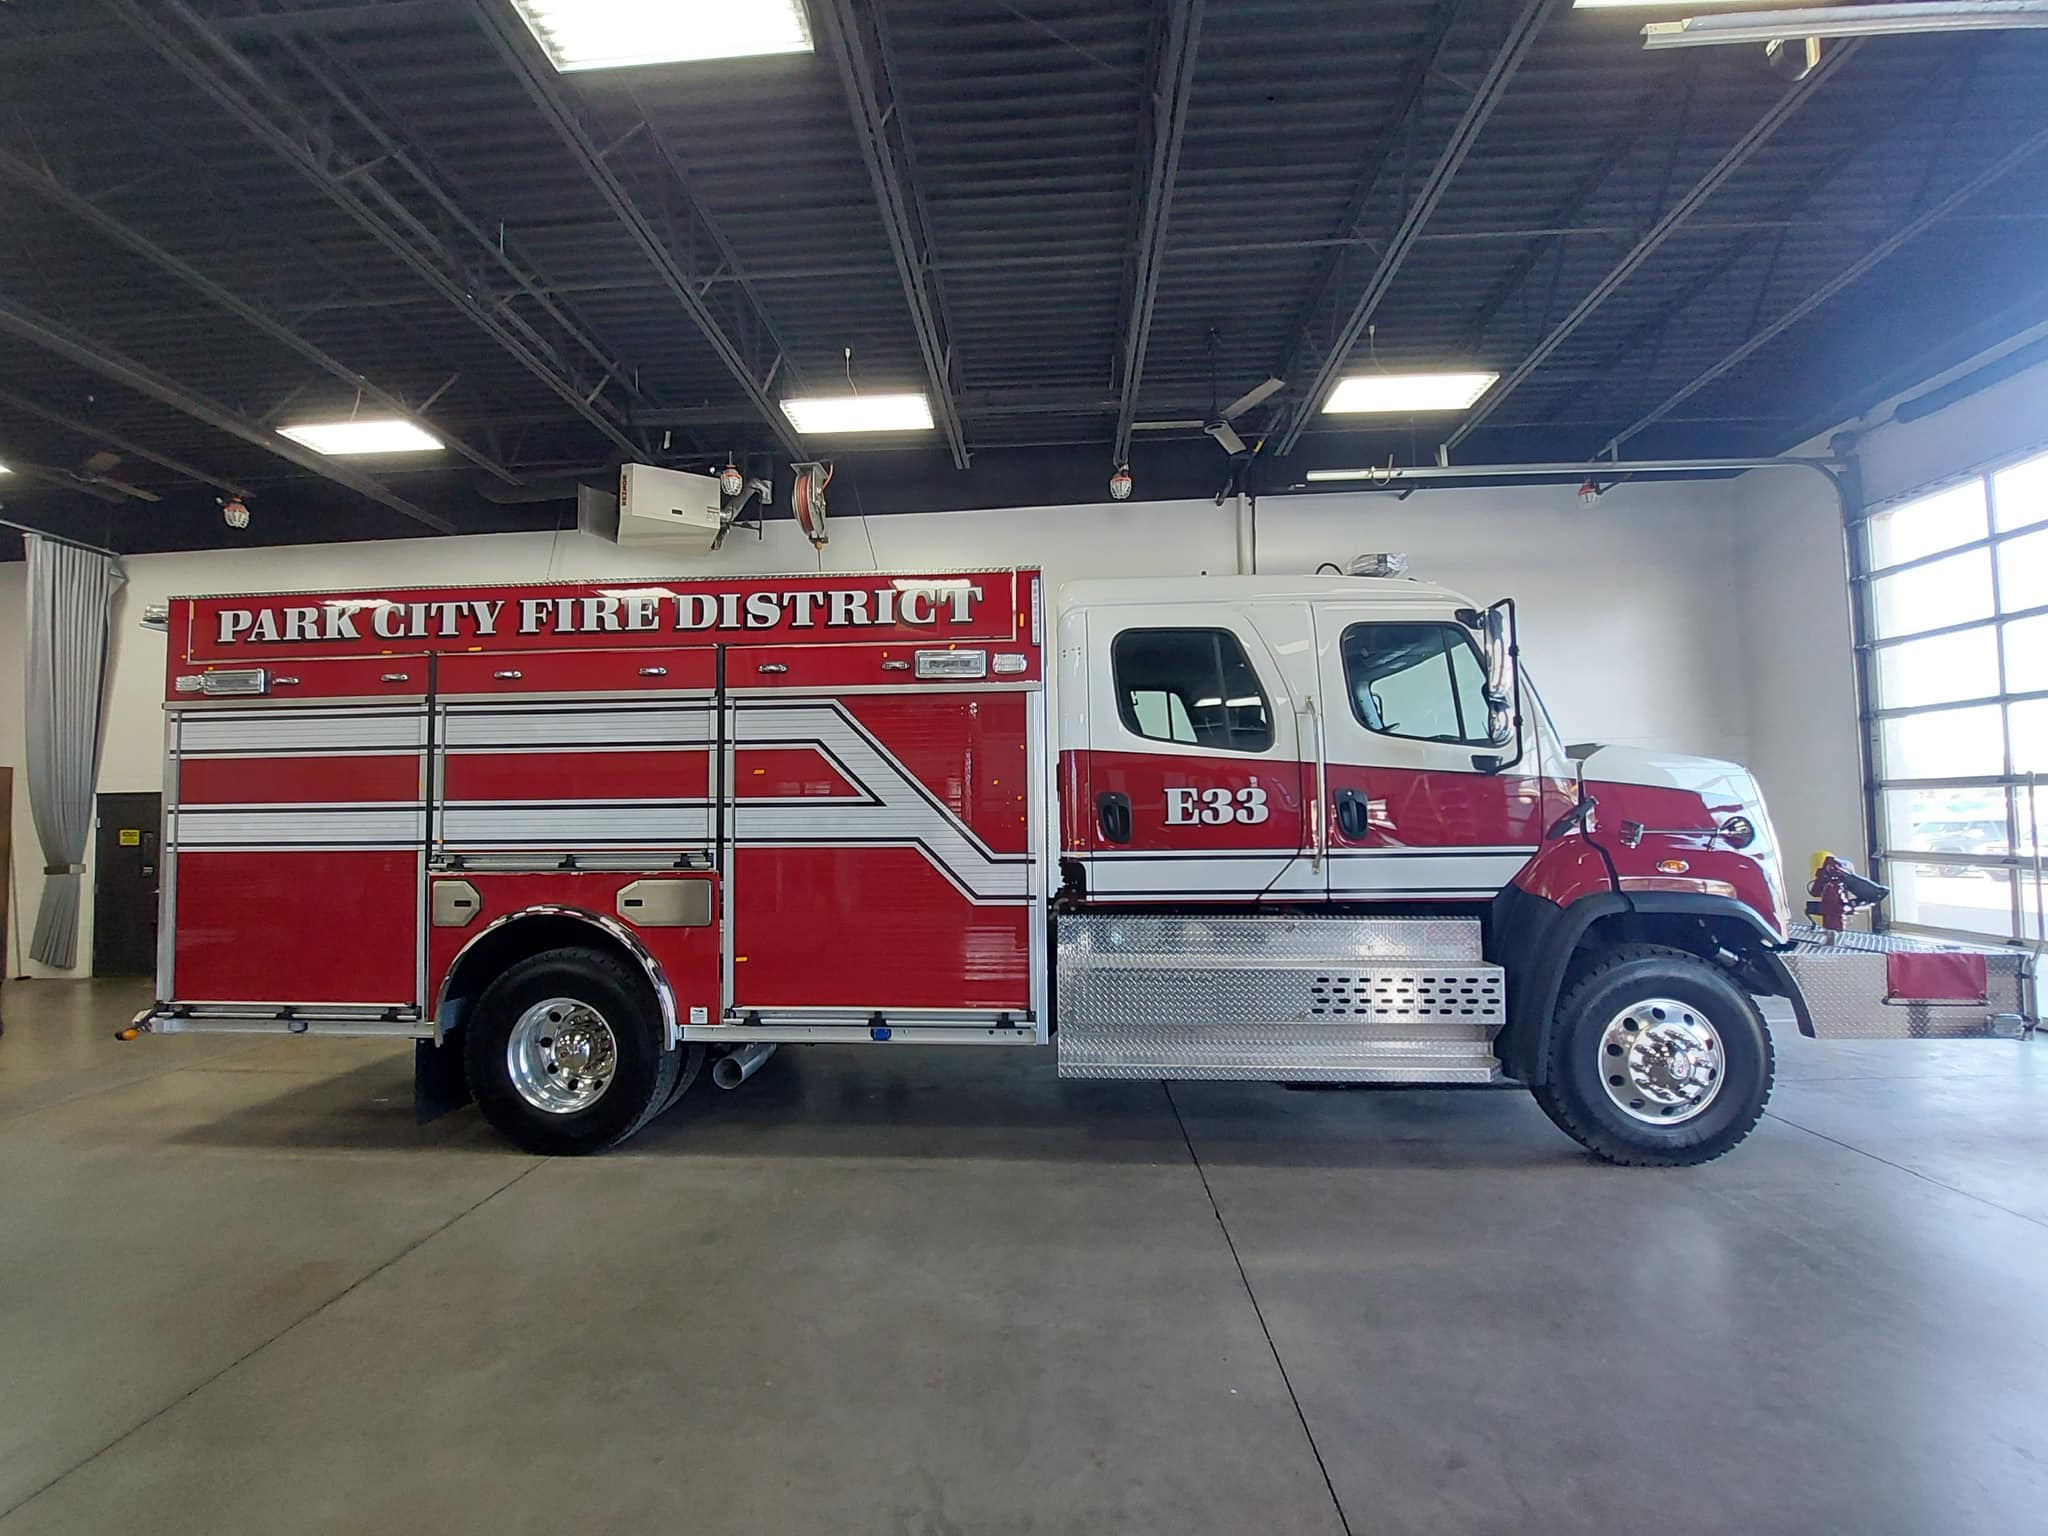 PCFD's new fire engine at the Rosenbauer America facility in Wyoming, Minnesota.